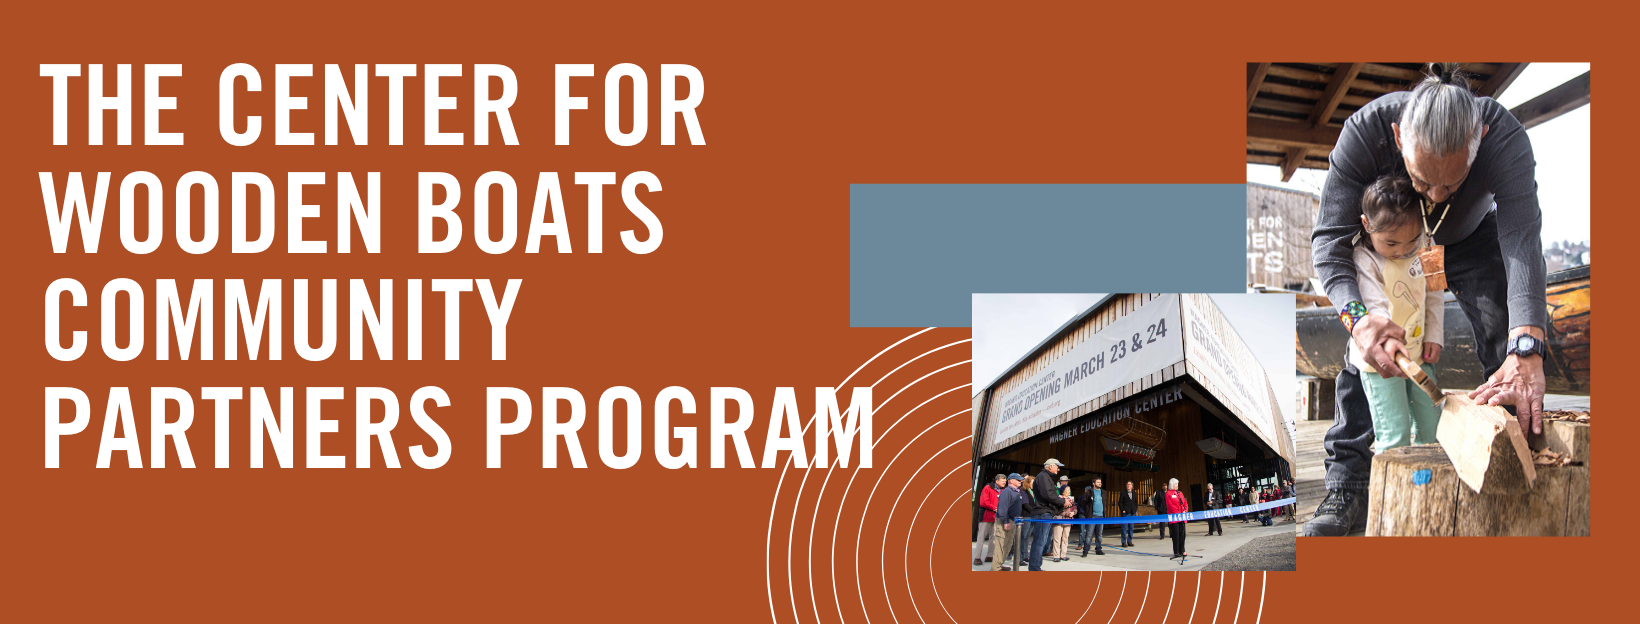 The Center for Wooden Boats Community Partners Program